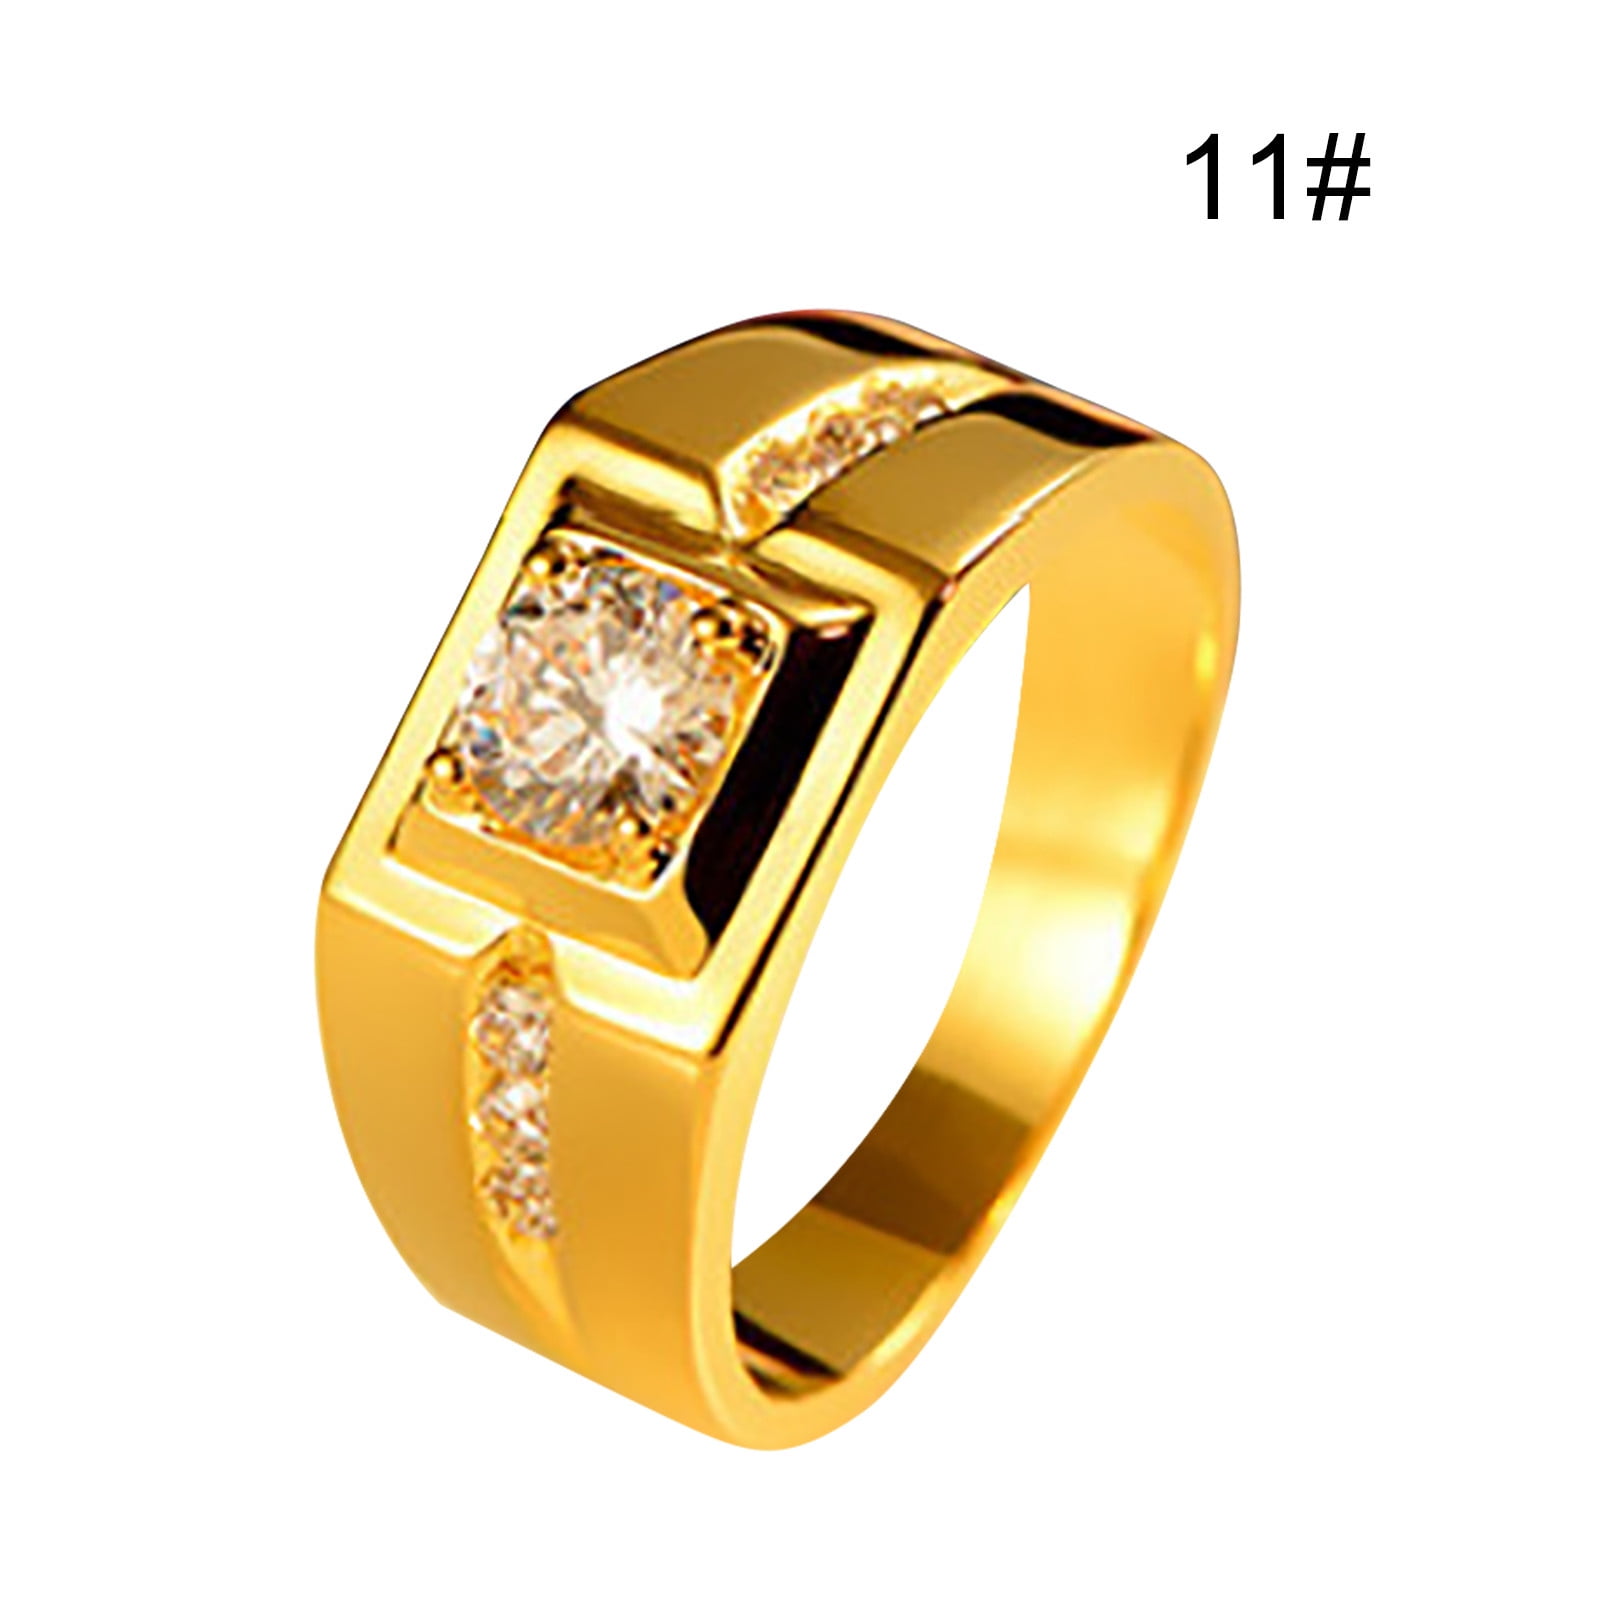 Candere by Kalyan Jewellers Miracle Plate Collection 18kt Diamond Yellow Gold  ring Price in India - Buy Candere by Kalyan Jewellers Miracle Plate  Collection 18kt Diamond Yellow Gold ring online at Flipkart.com